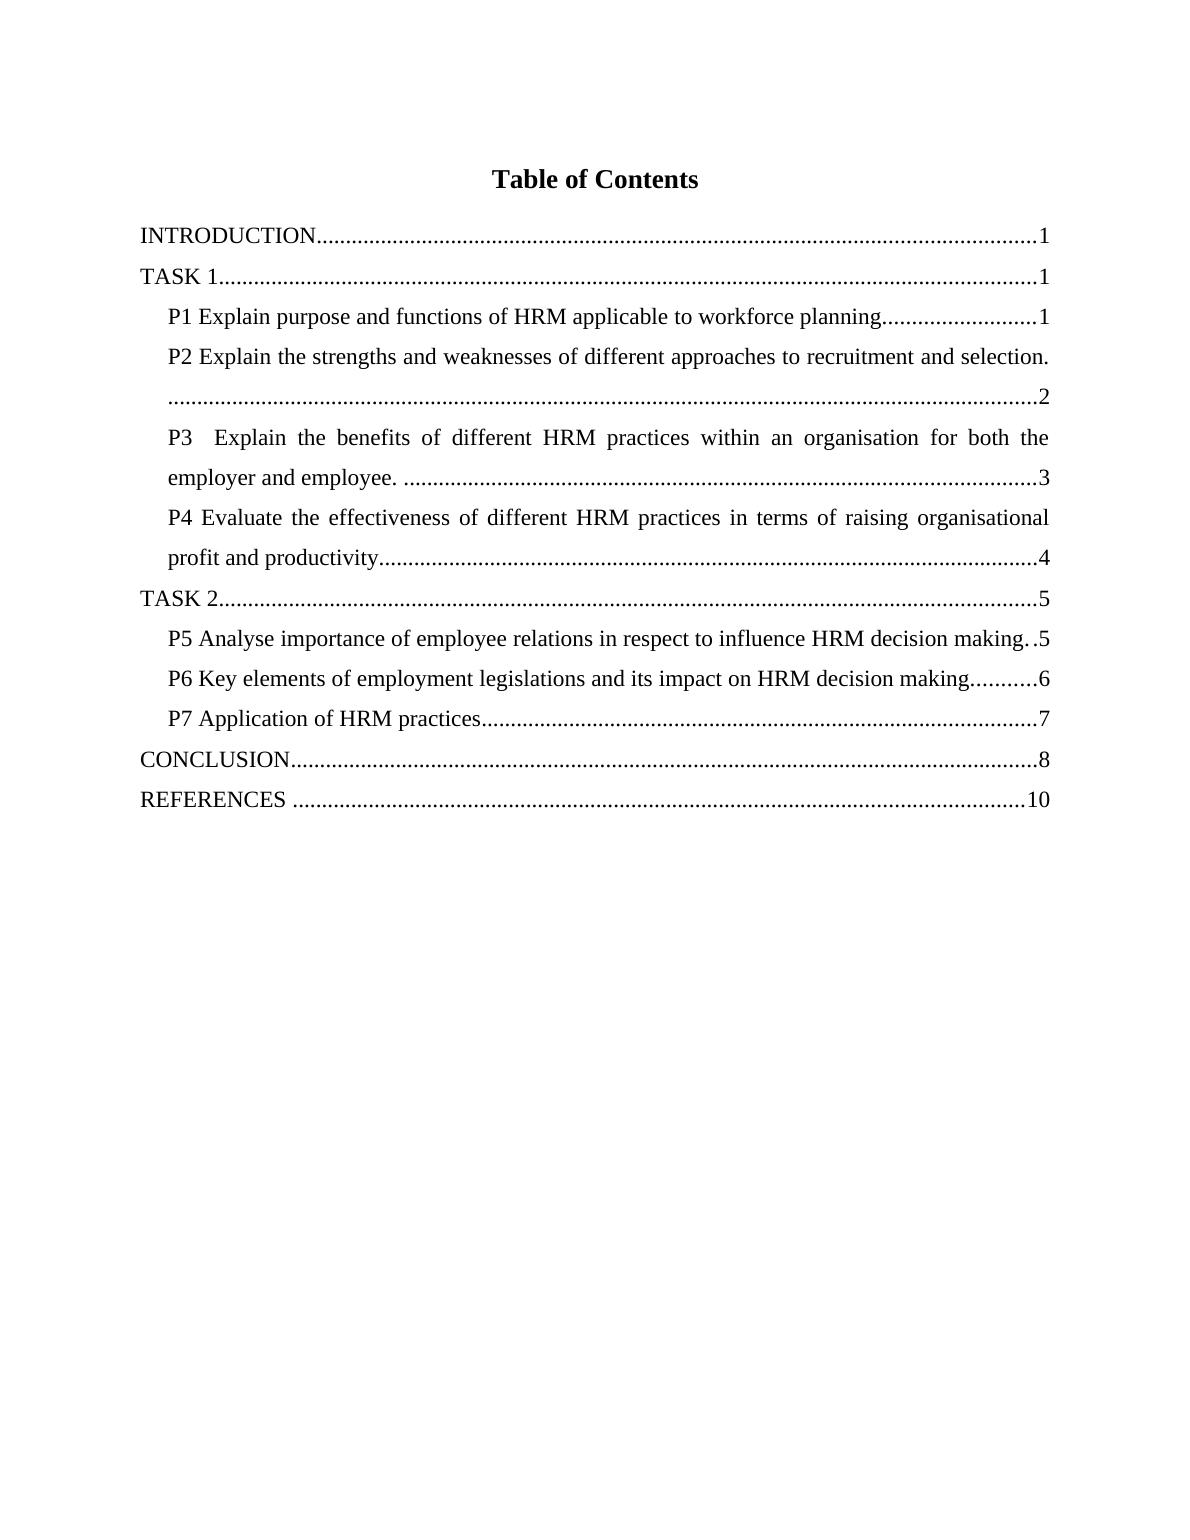 Essay on Functions of HRM and Approaches of Recruitment_2